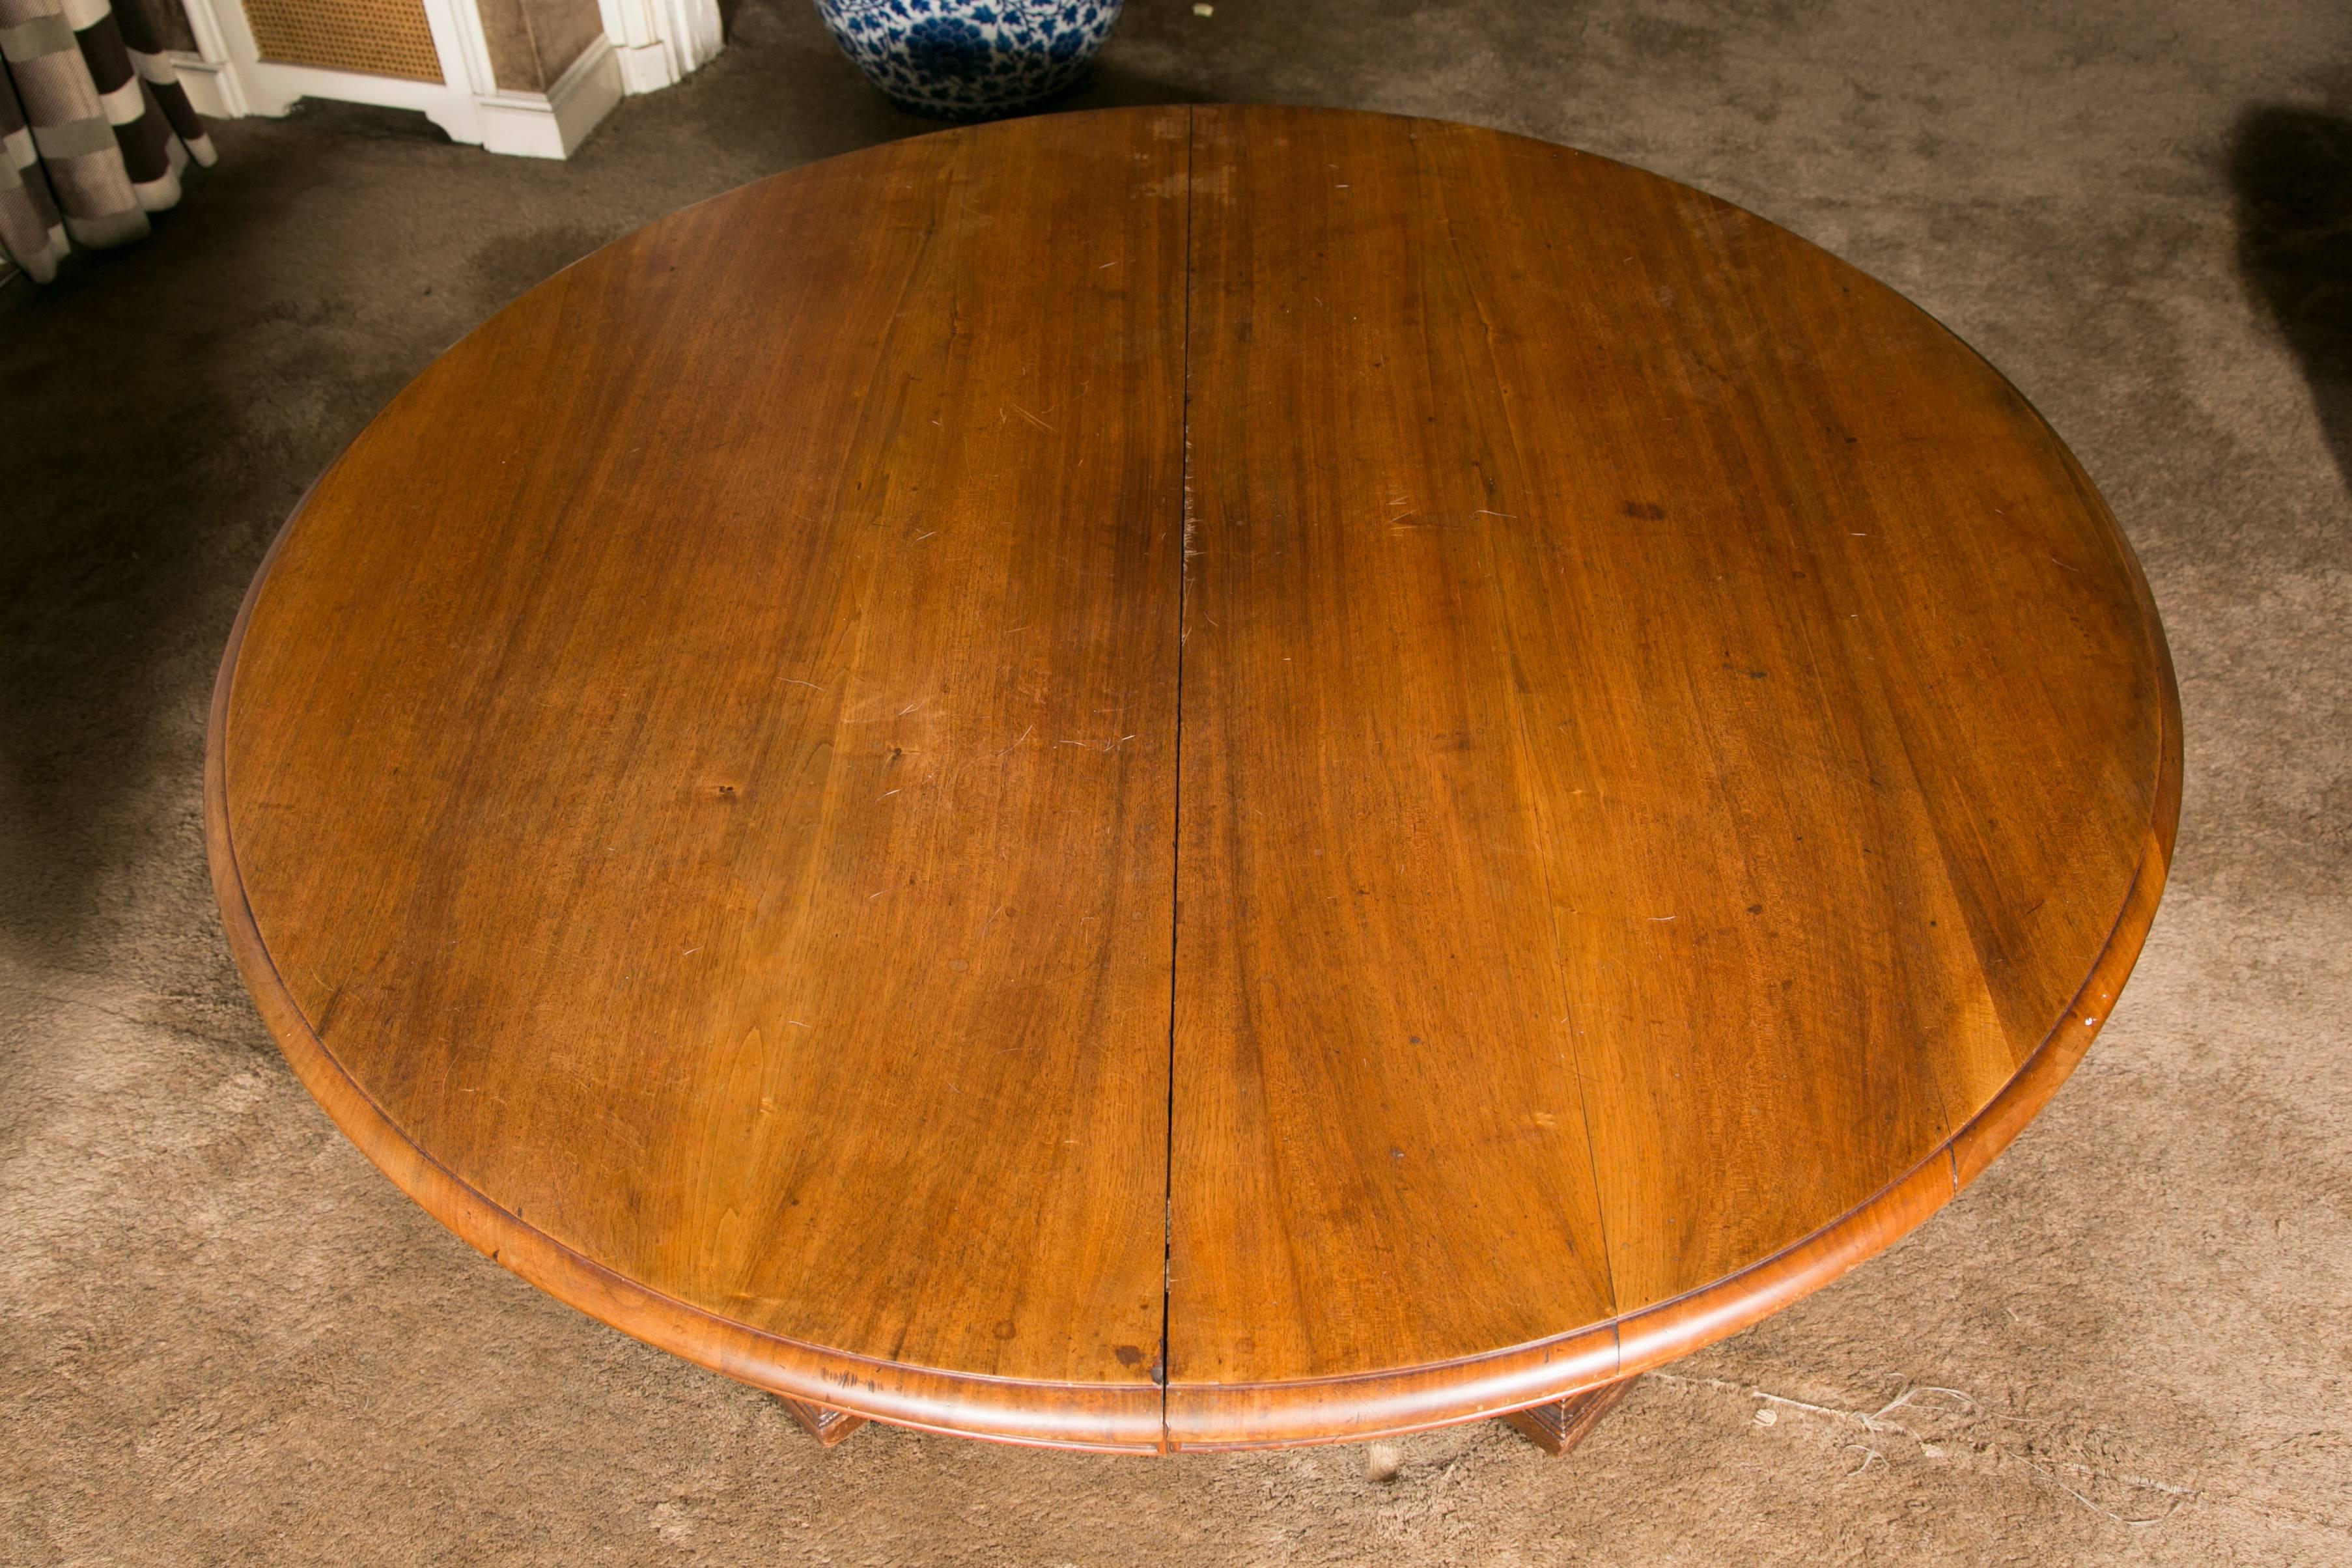 Patinated Extending Large Walnut Dining Room Table